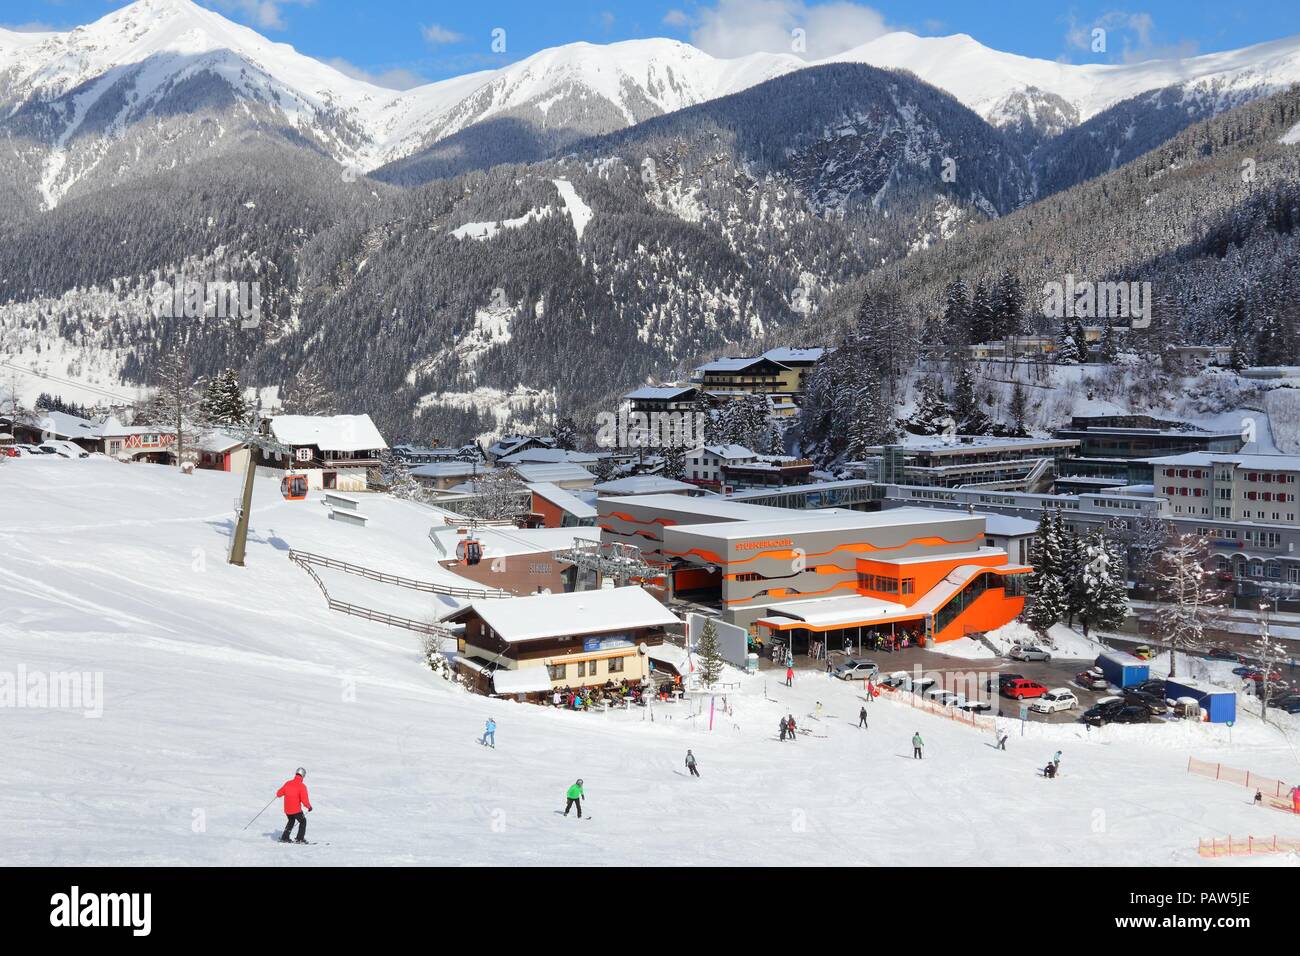 BAD GASTEIN, AUSTRIA - MARCH 9, 2016: People ski in Bad Gastein. It is part of Ski Amade, one of largest ski regions in Europe with 760km of ski runs. Stock Photo